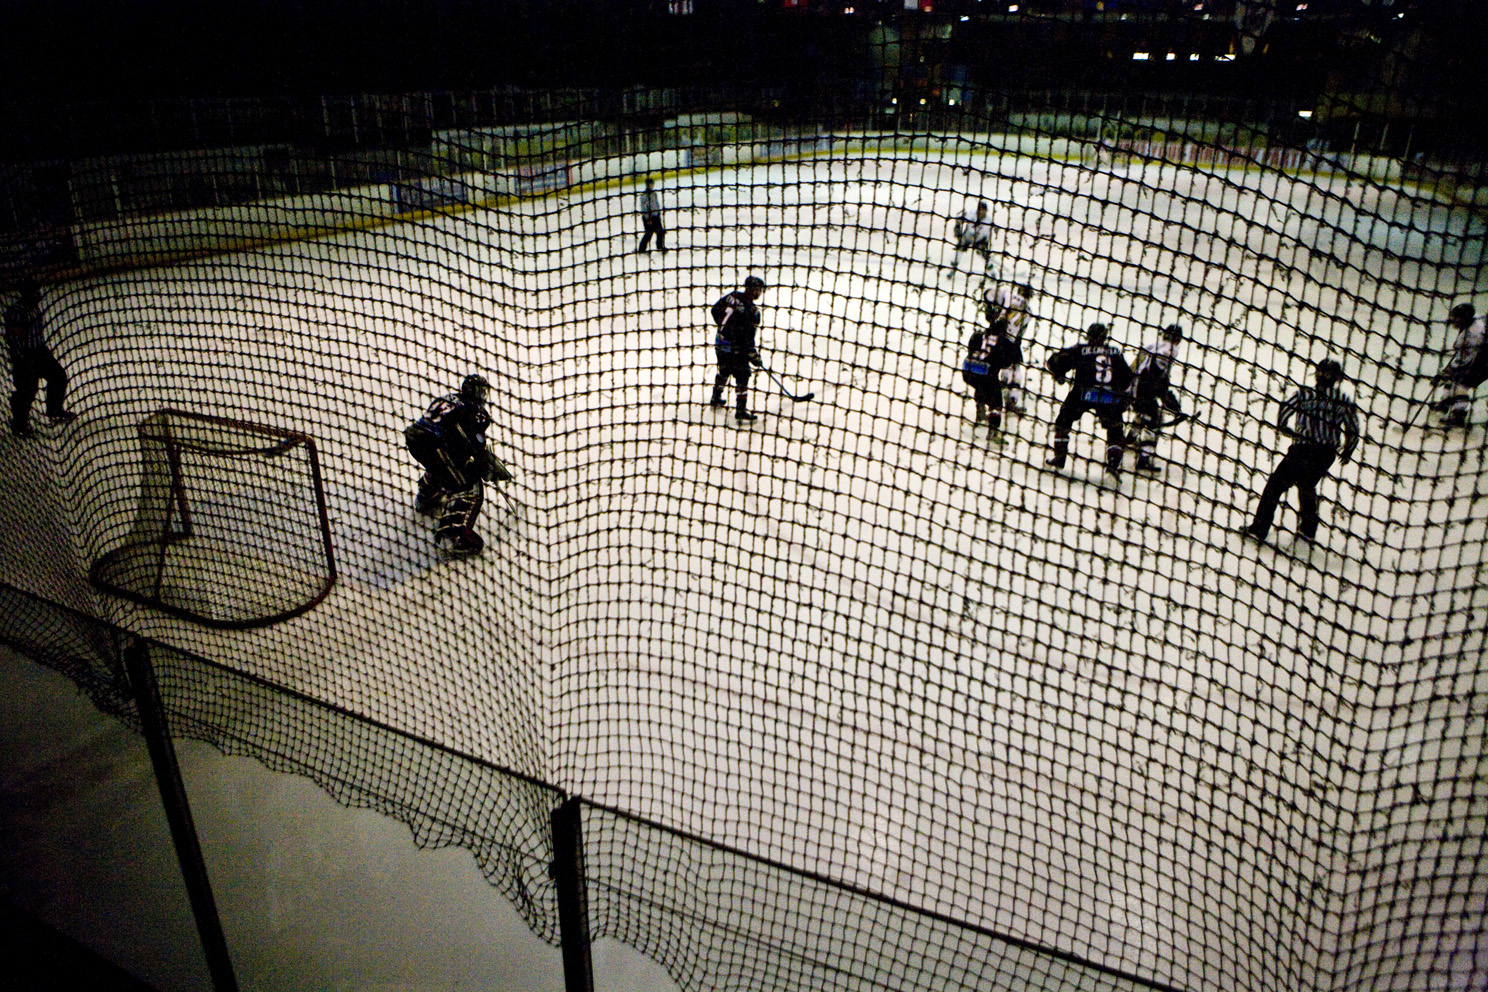 Game day at Planet Ice, watching the Milton Keynes Lightning Ice-Hockey team.